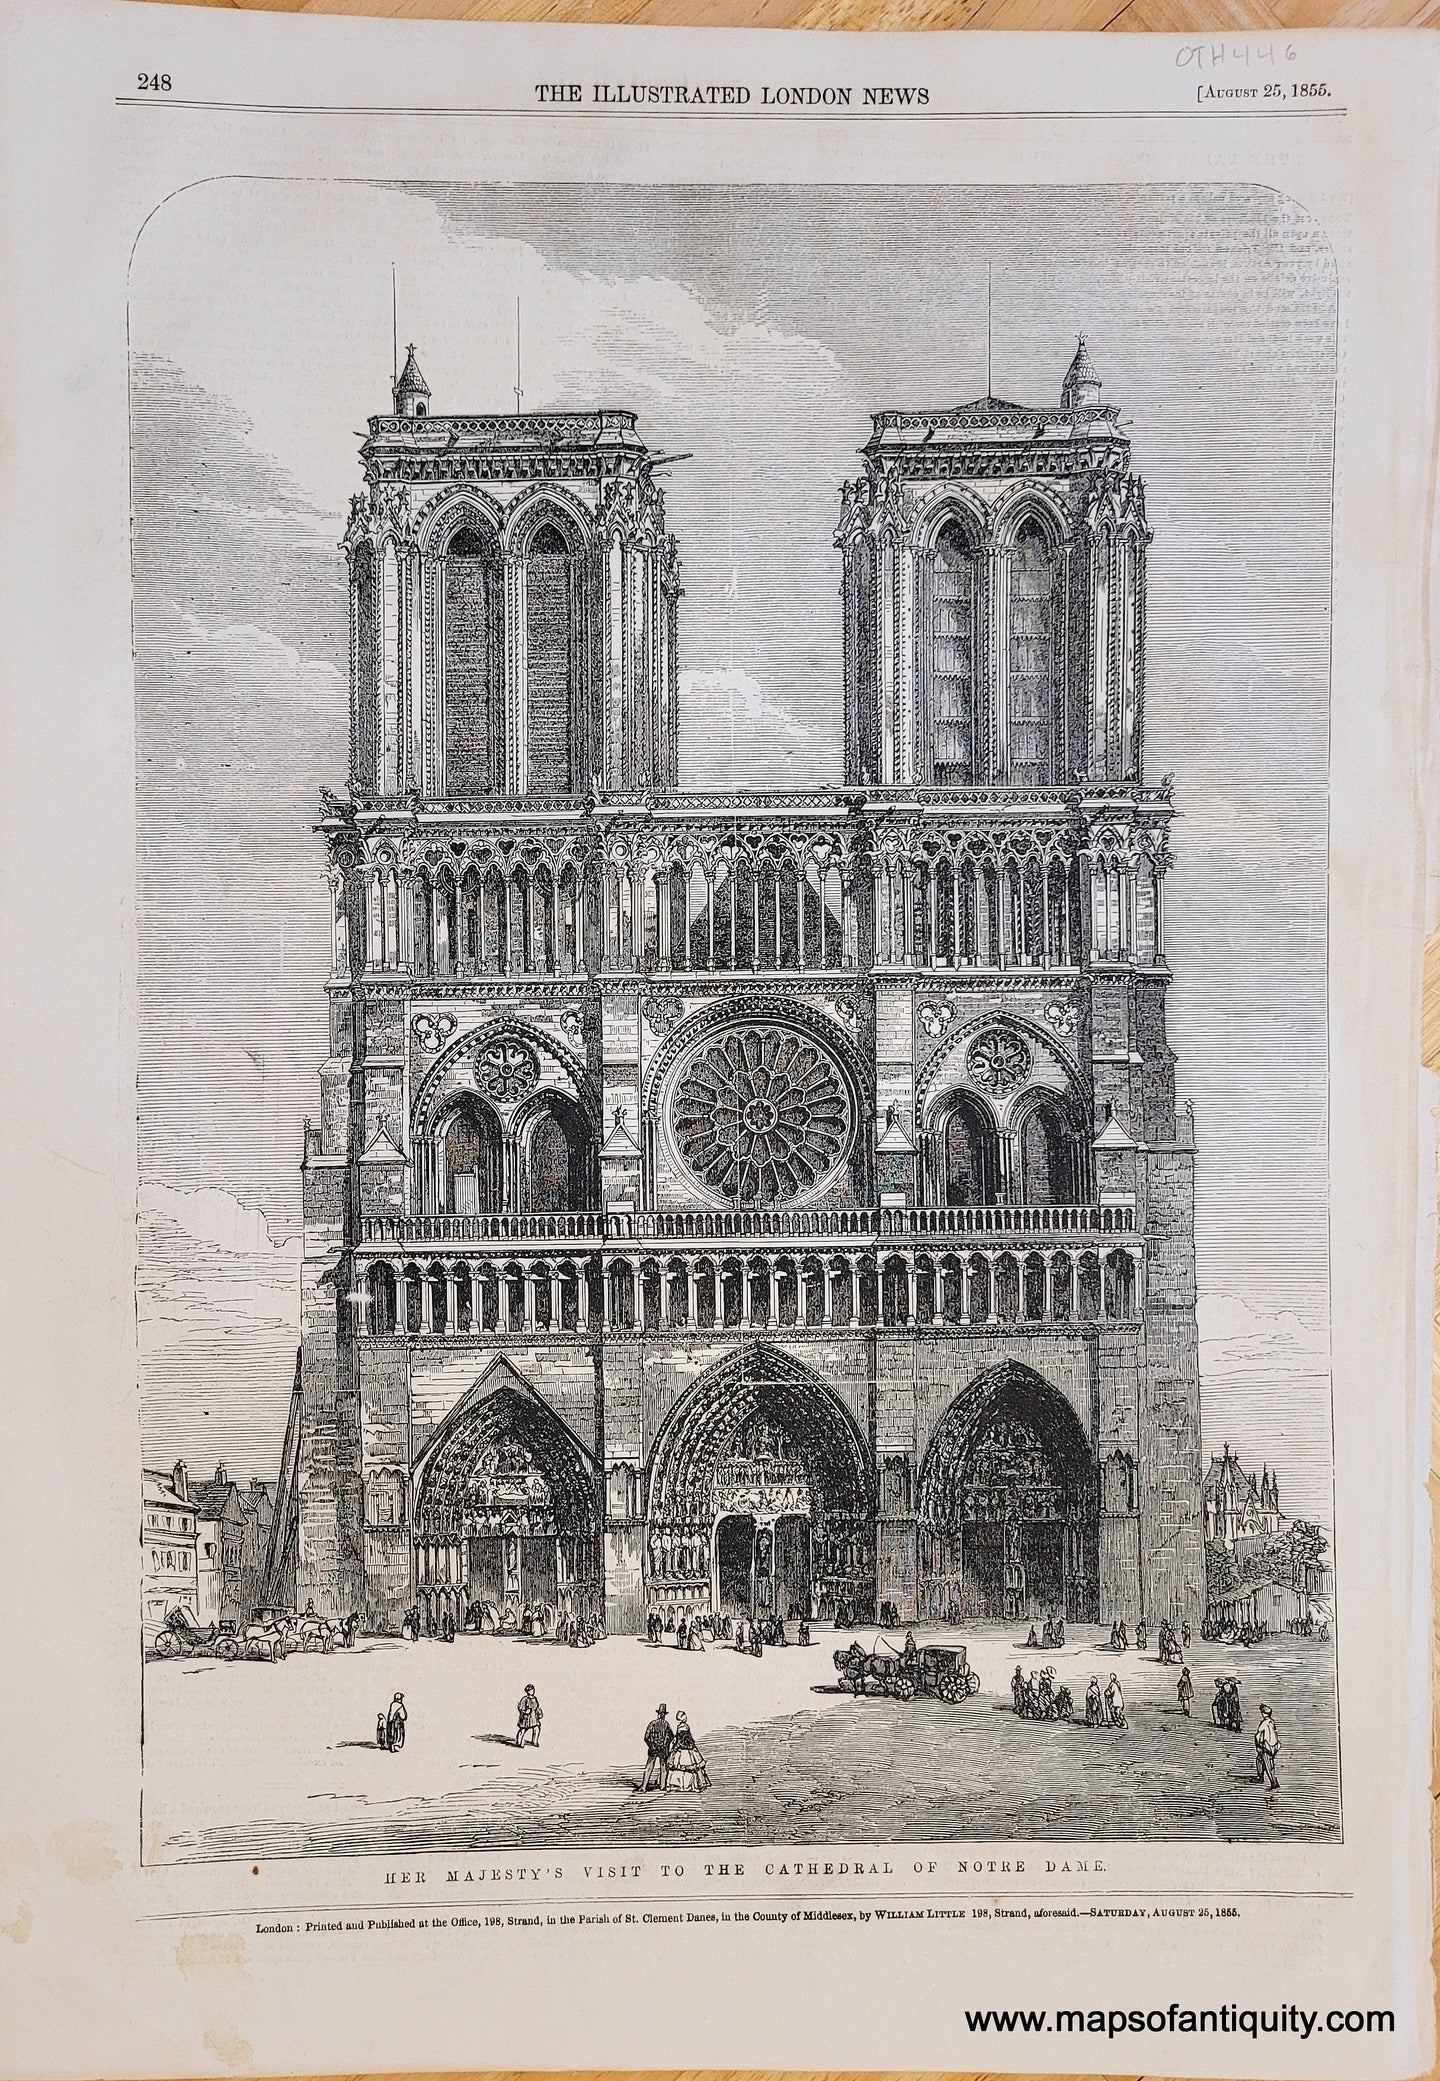 Genuine-Antique-Print-Her-Majestys-Visit-to-the-Cathedral-of-Notre-Dam-Antique-Prints-Other-Antique-Prints-Paris-1855-Illustrated-London-News-Maps-Of-Antiquity-1800s-19th-century